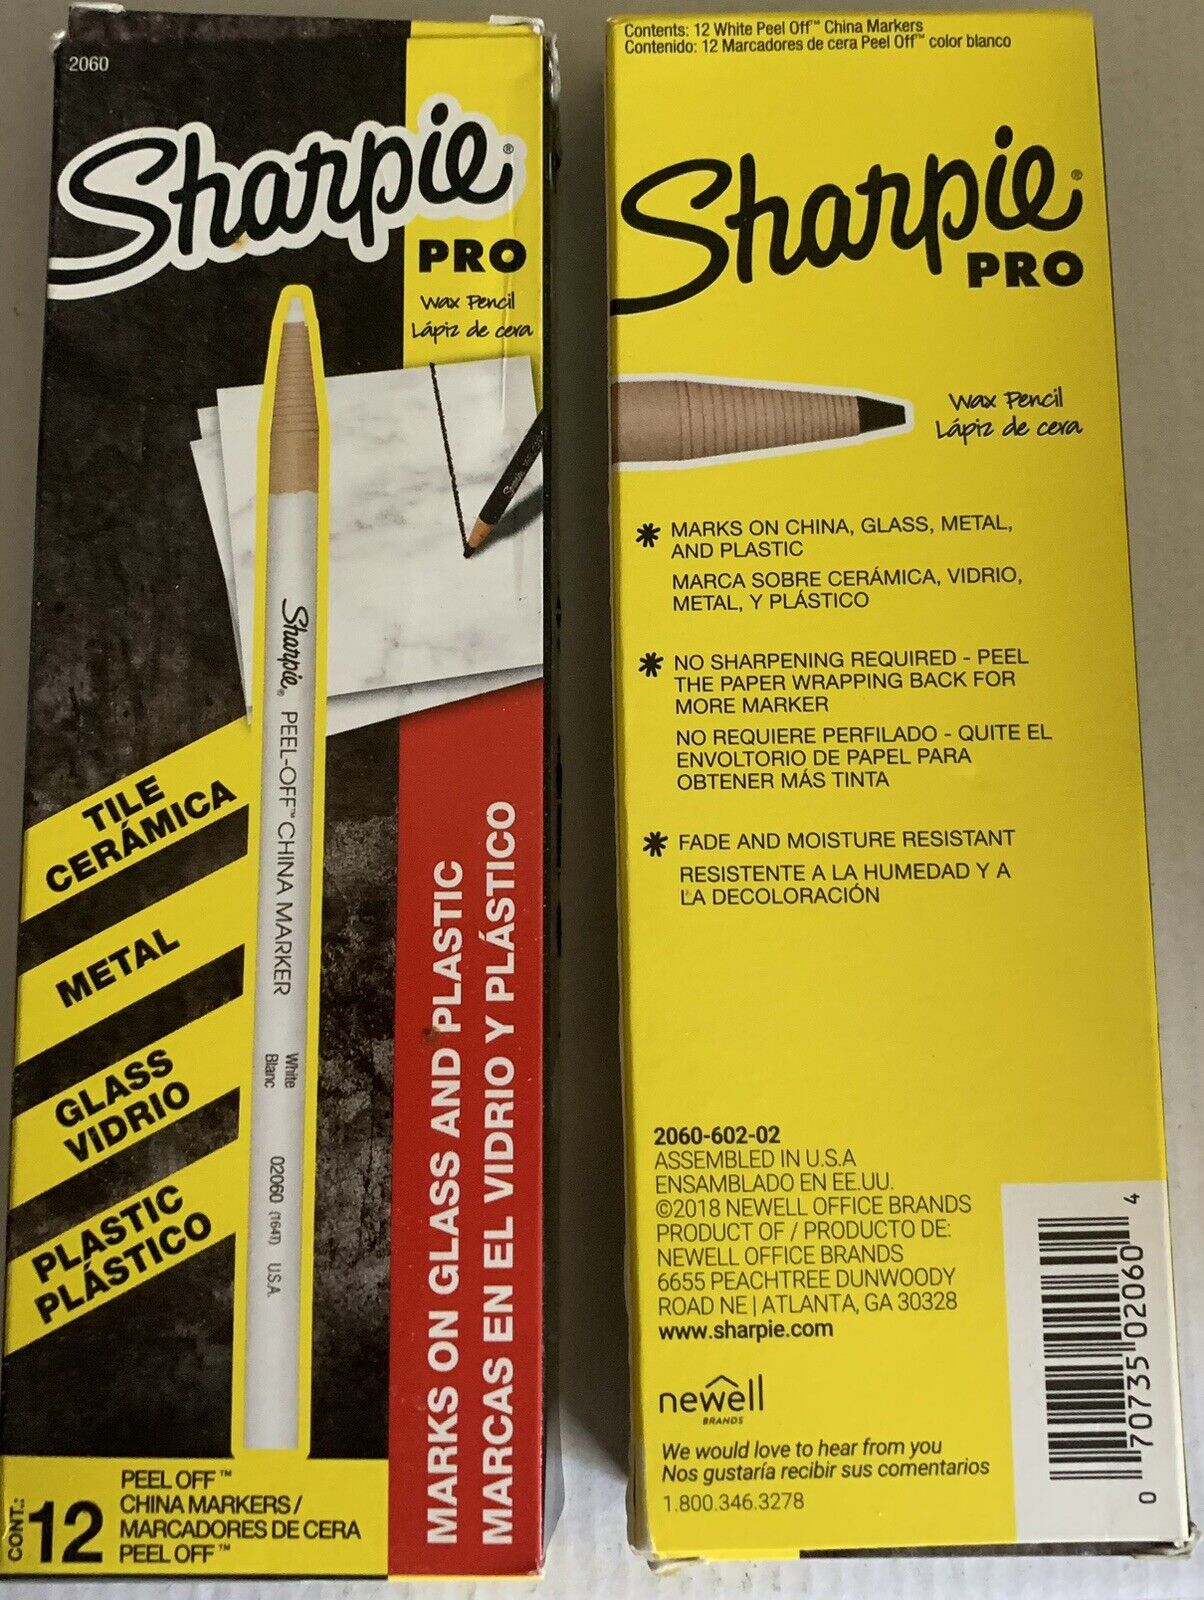 3 pack Sharpie Pro White Peel Off China Marker, Grease Pencil, 02060, 12 per box